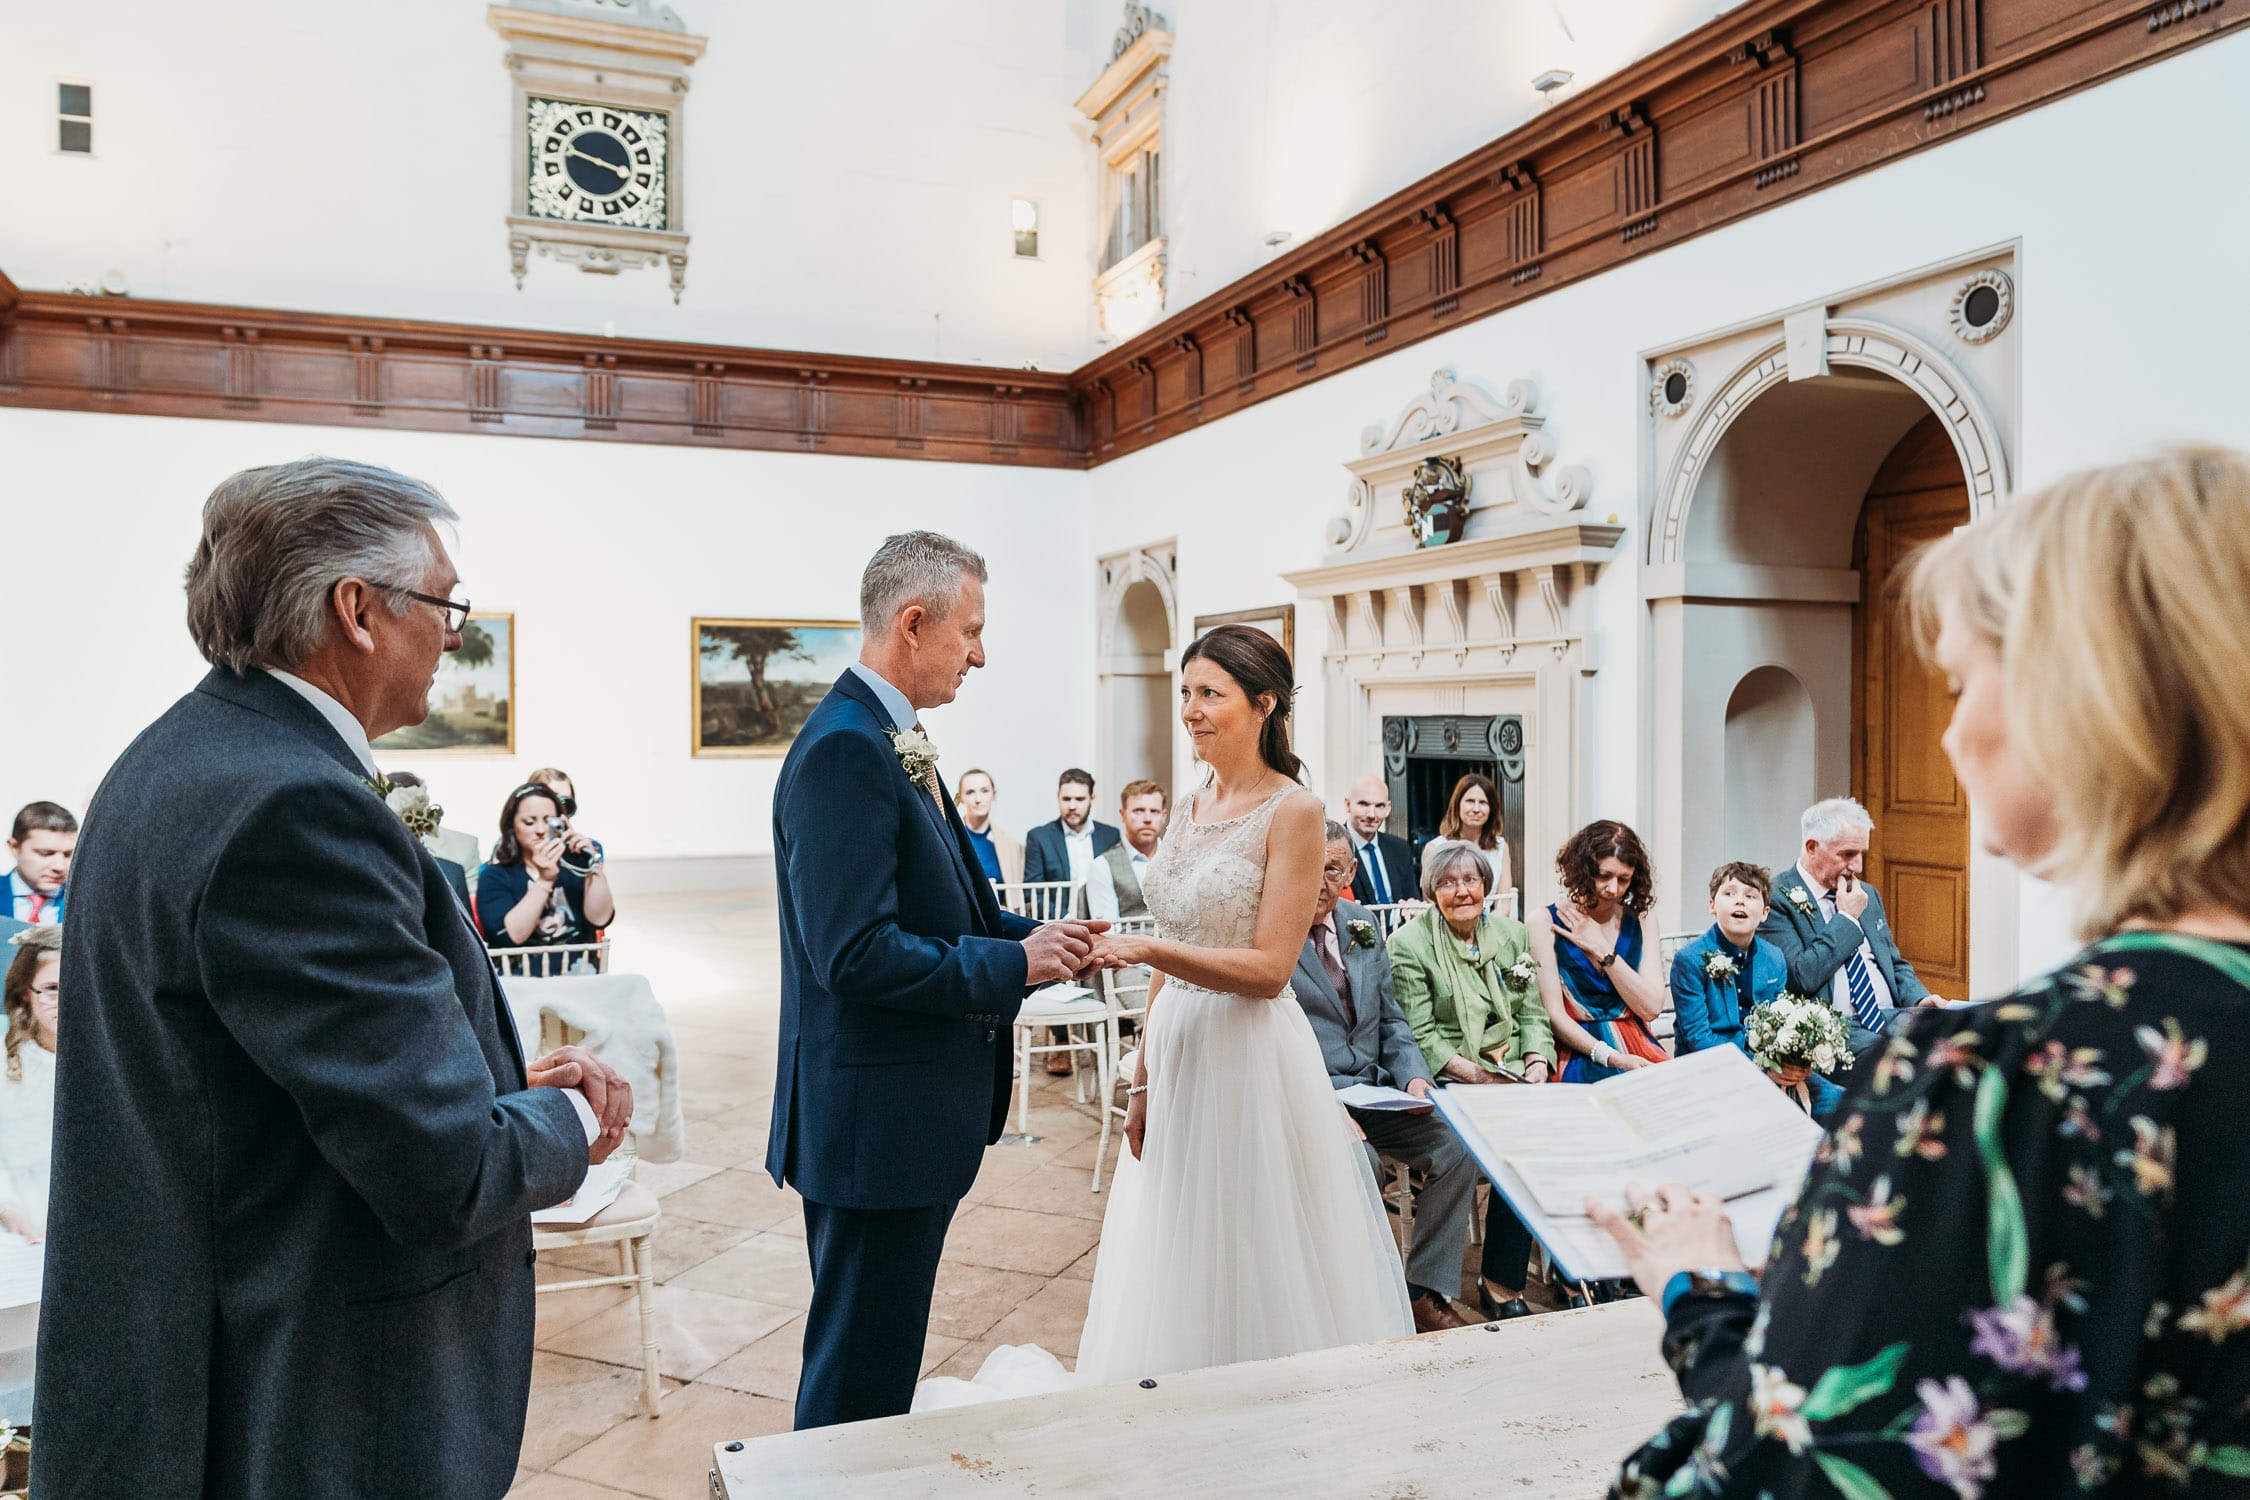 A photo of Bride and groom exchanging wedding rings during their wedding ceremony in the grand hall at Wollaton Hall Nottingham